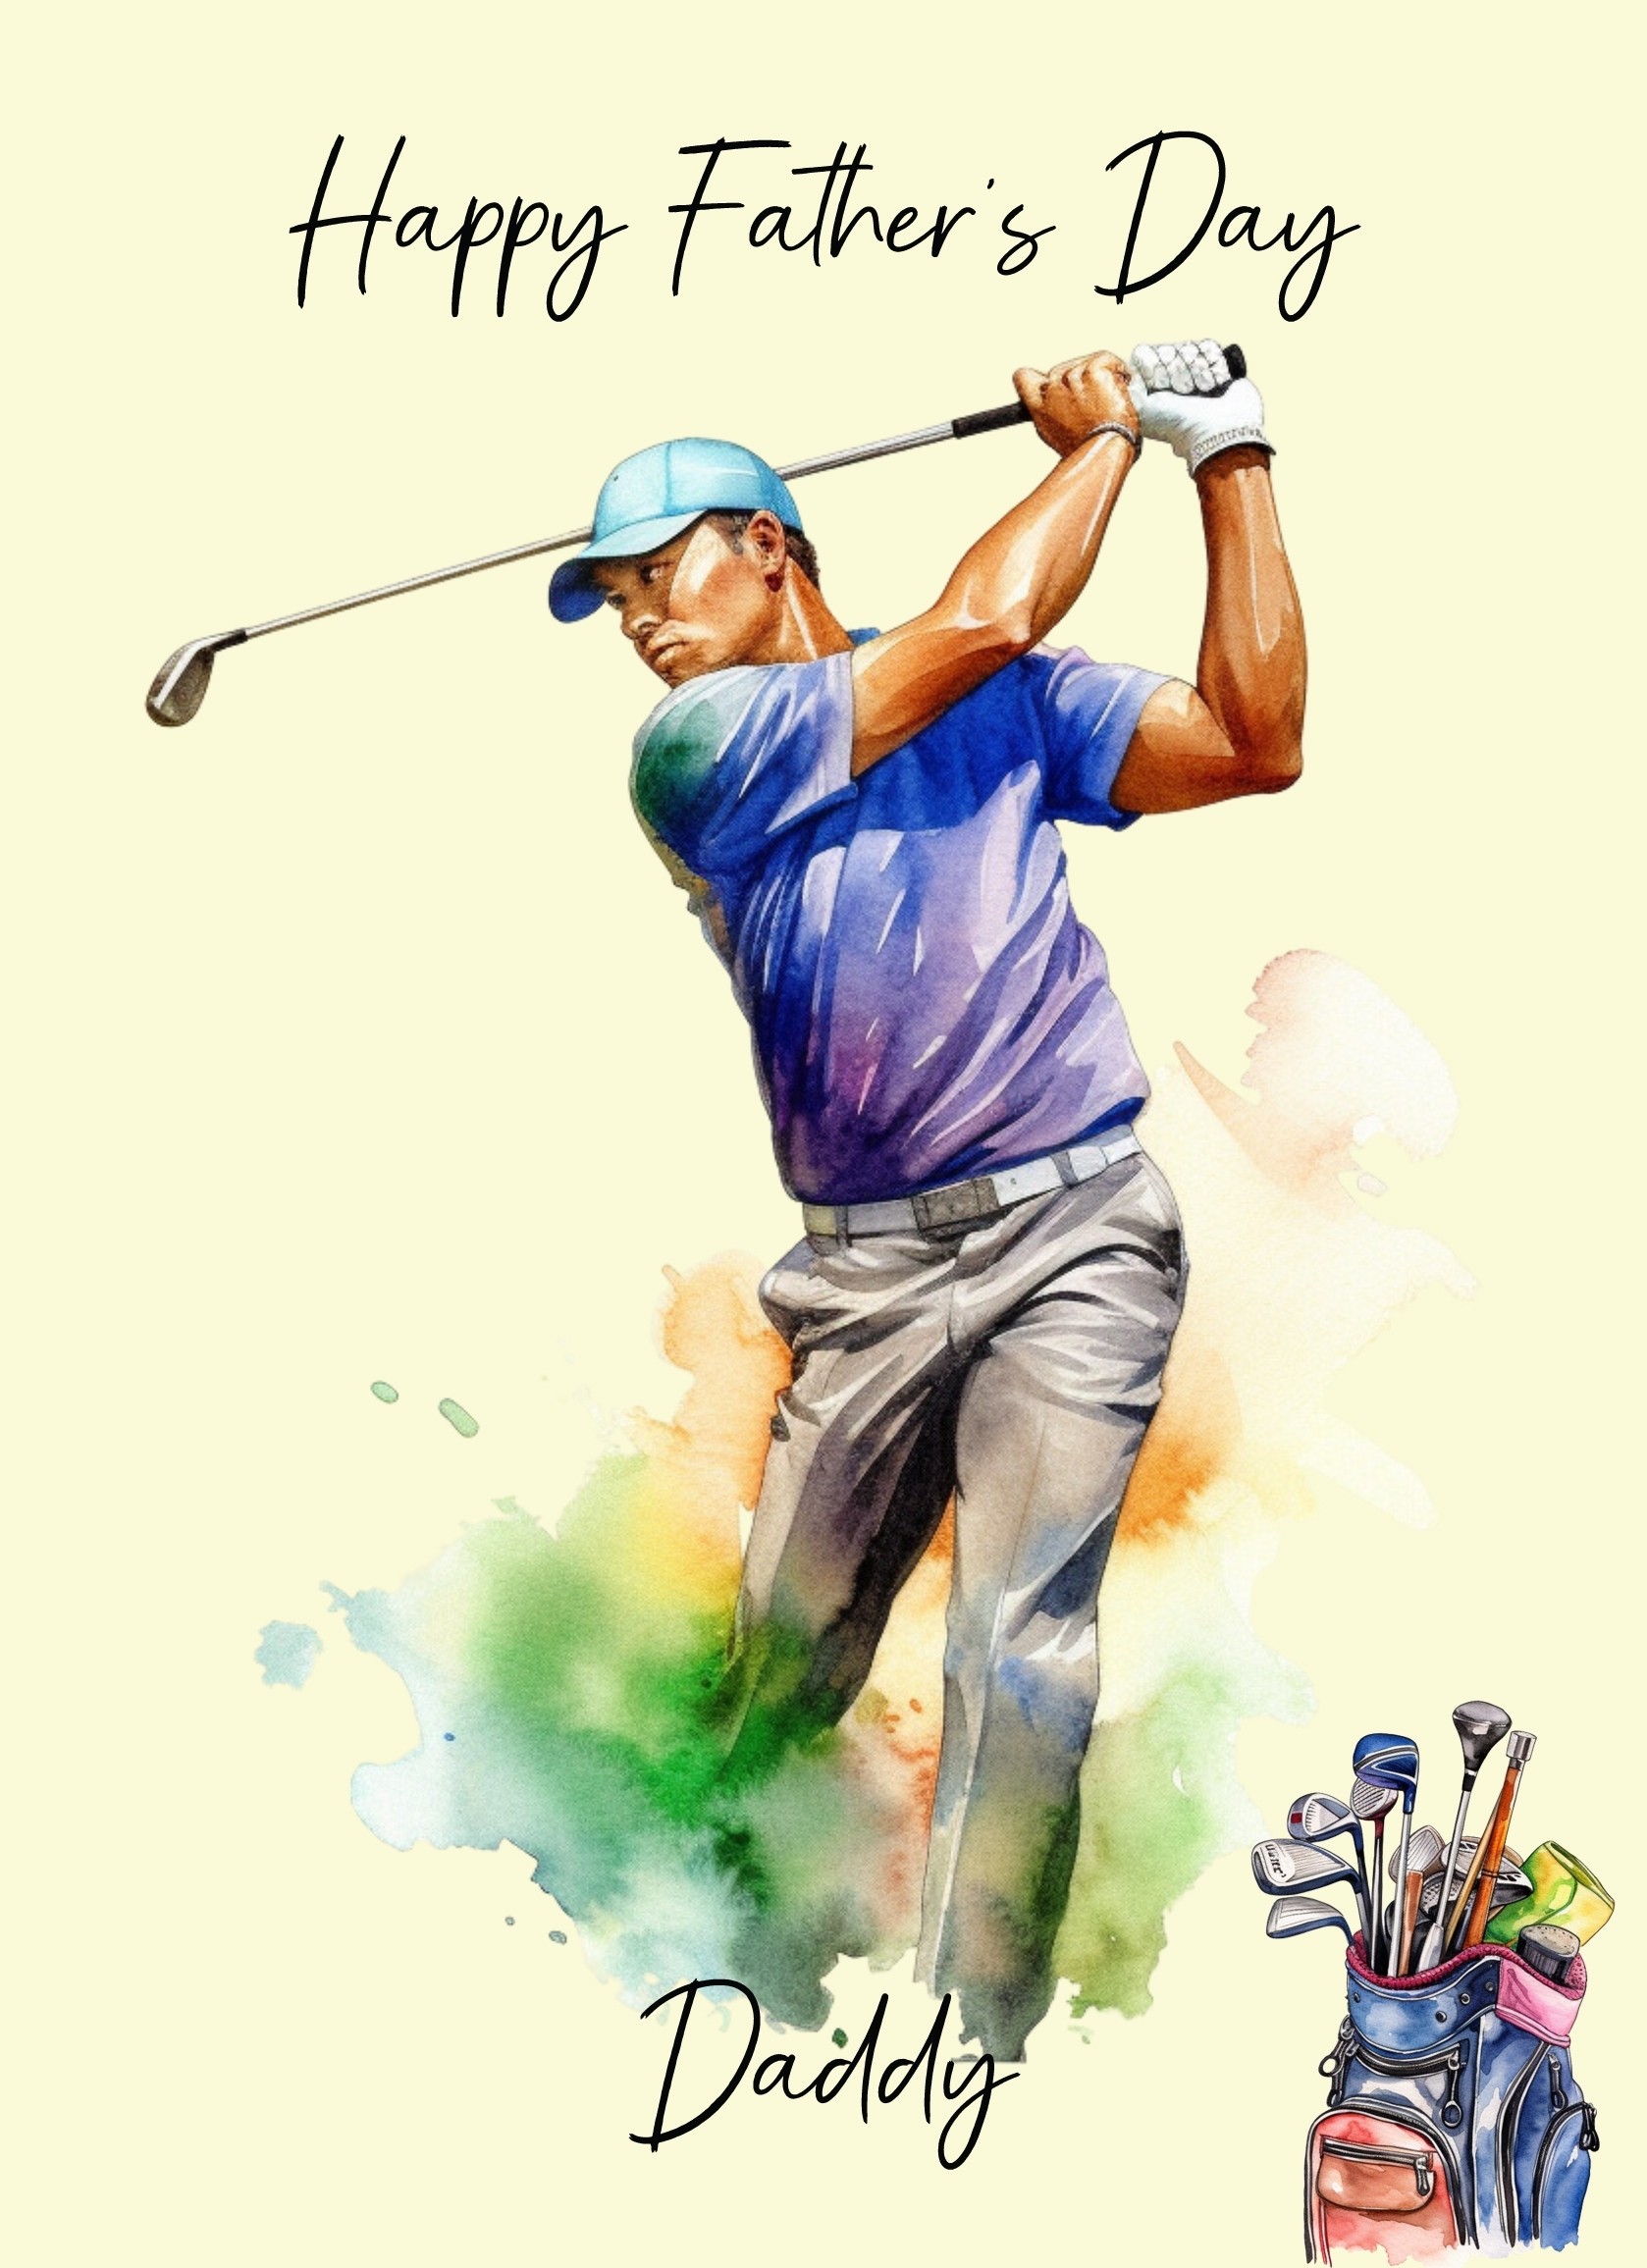 Golf Watercolour Art Fathers Day Card for Daddy